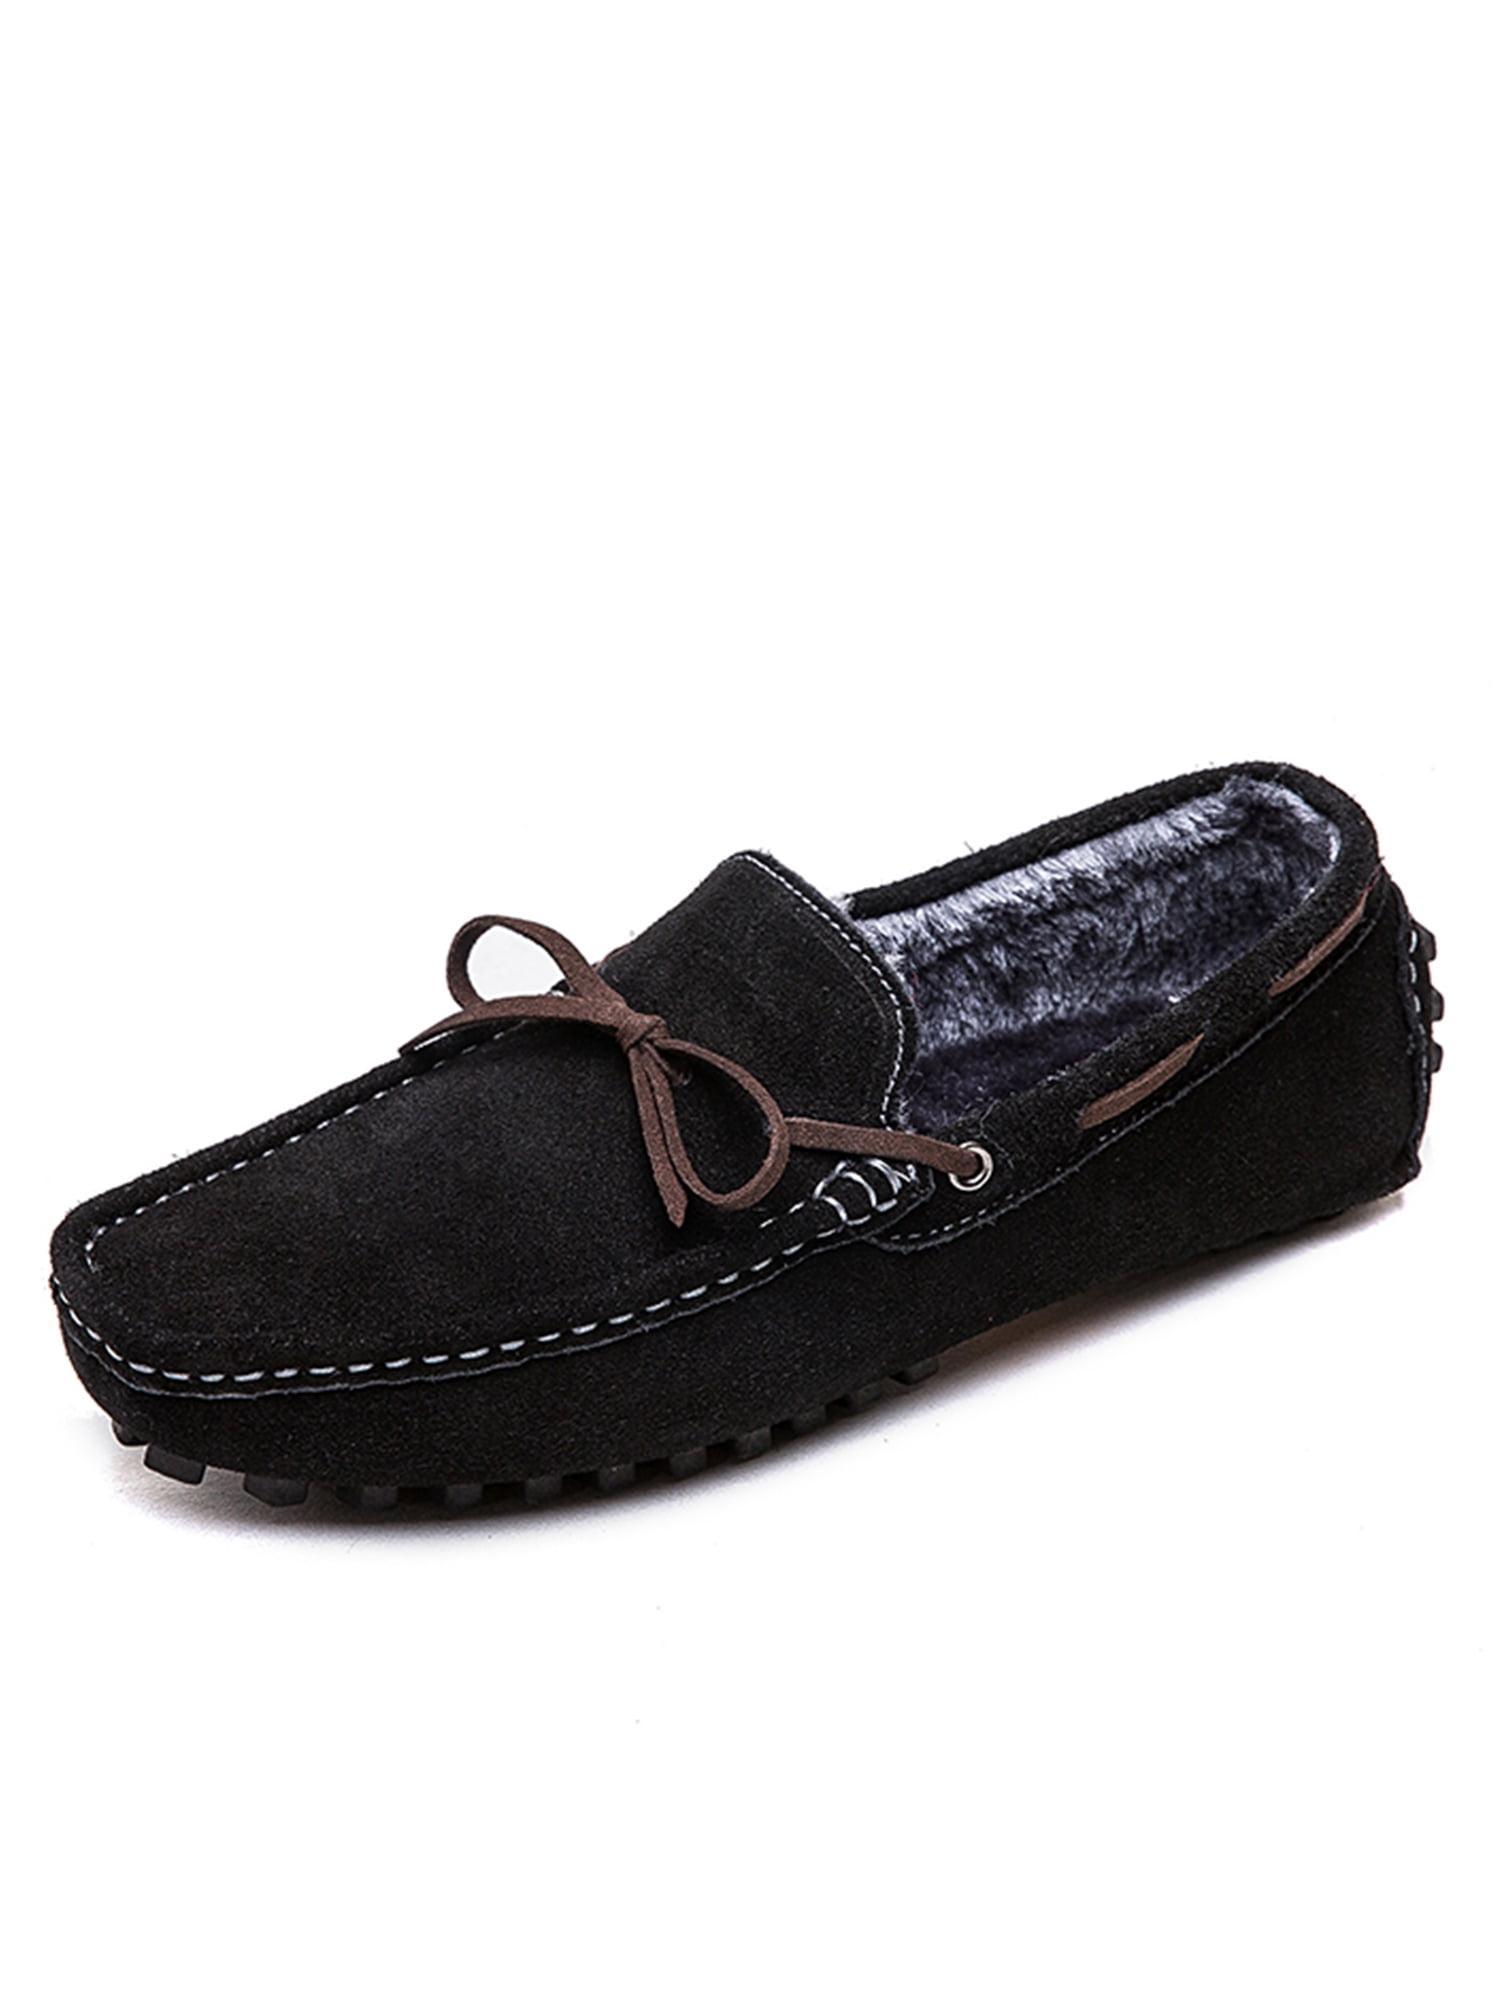 Men's Driving Loafers Linen Home Indoor Slippers Casual Slip On Walking Shoes 